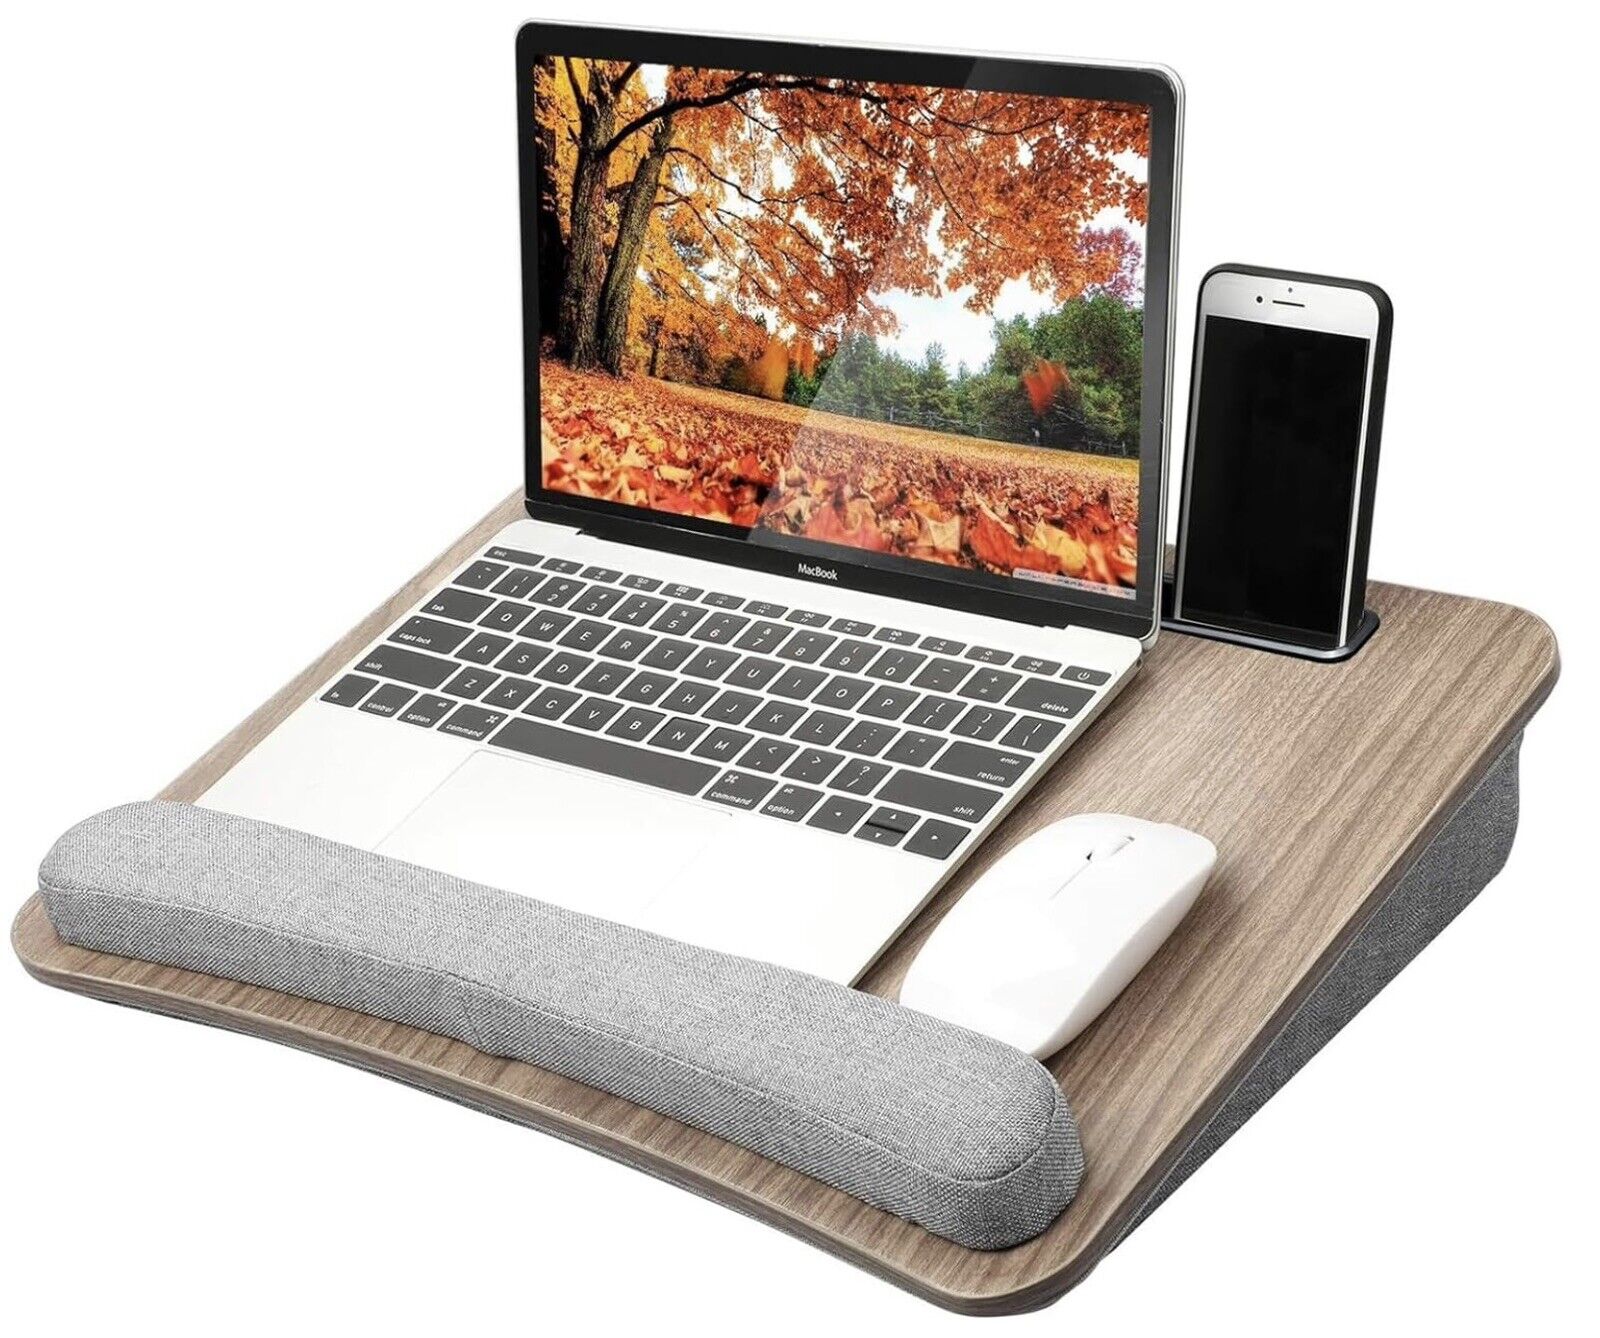 HUANUO Portable Lap Laptop Desk with Pillow Cushion, Fits up to 15.6 inch